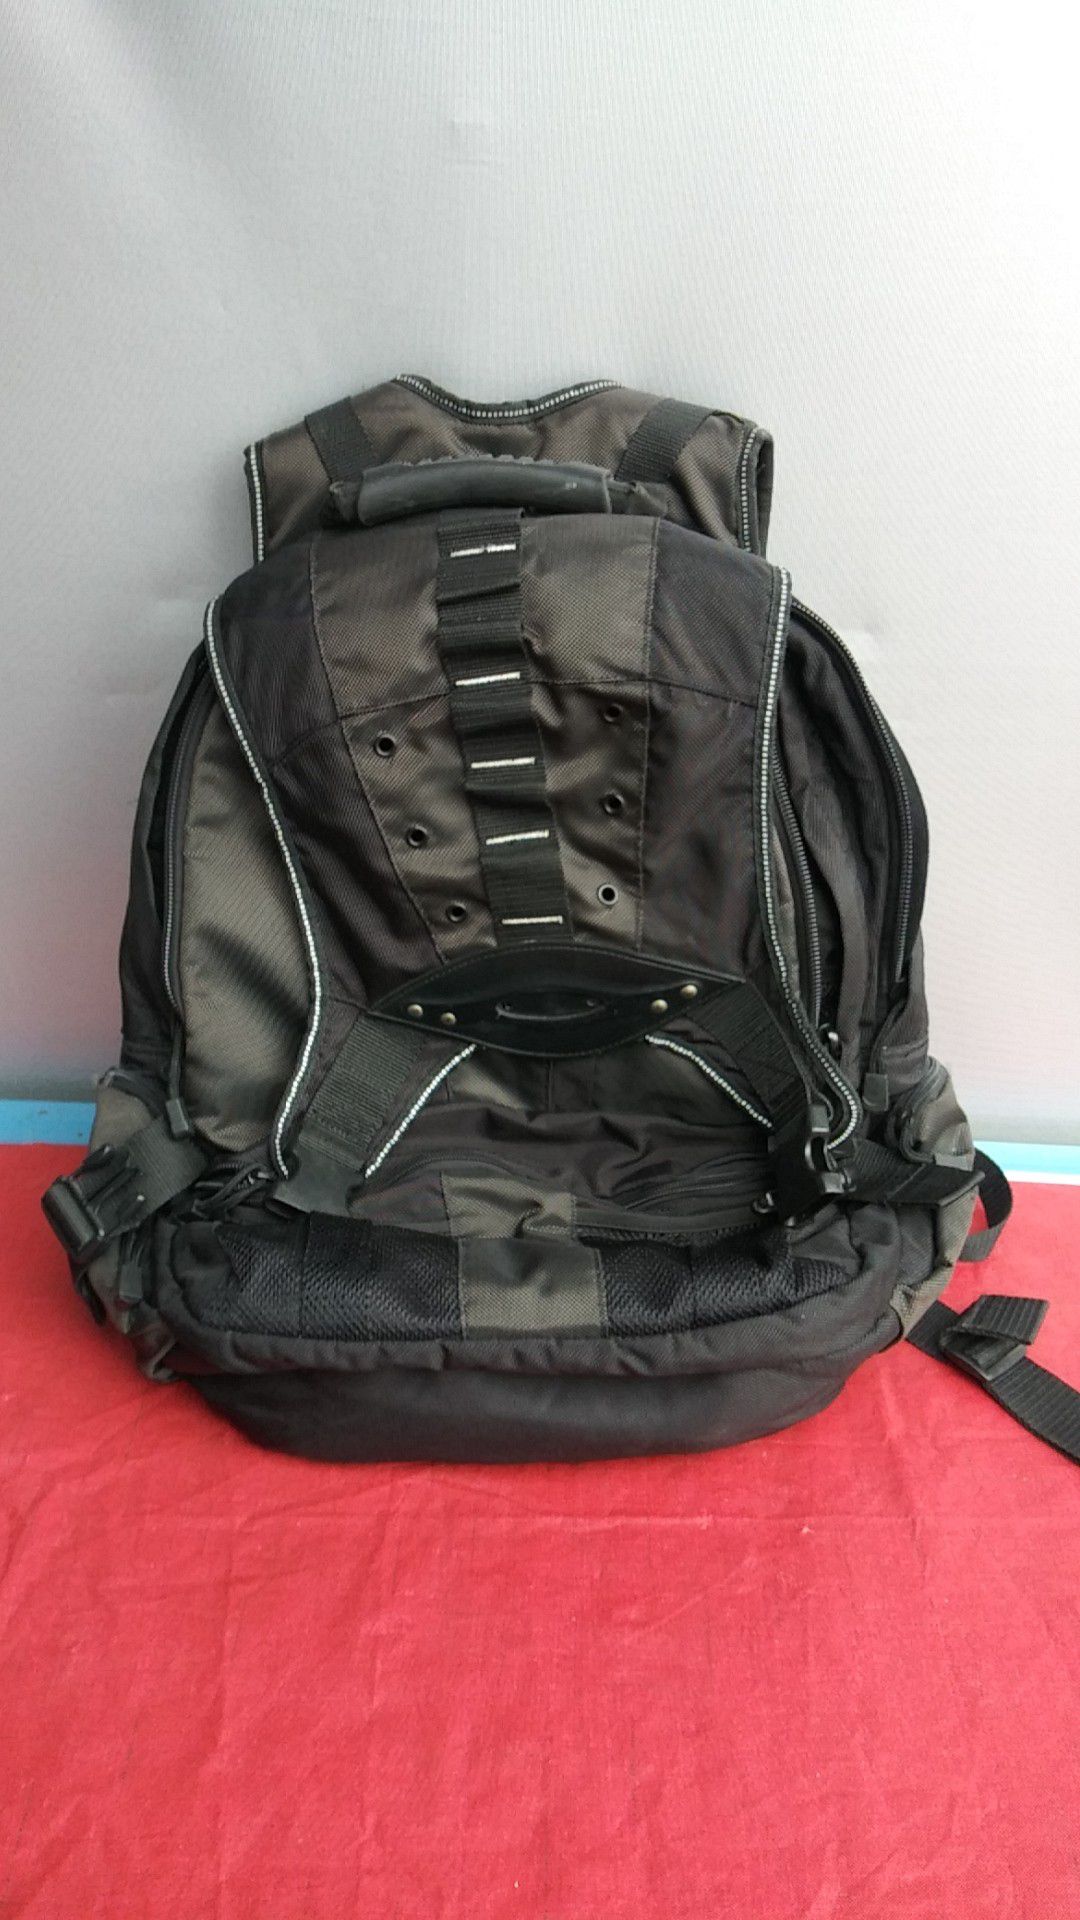 Mobile Edge laptop/notebook backpack